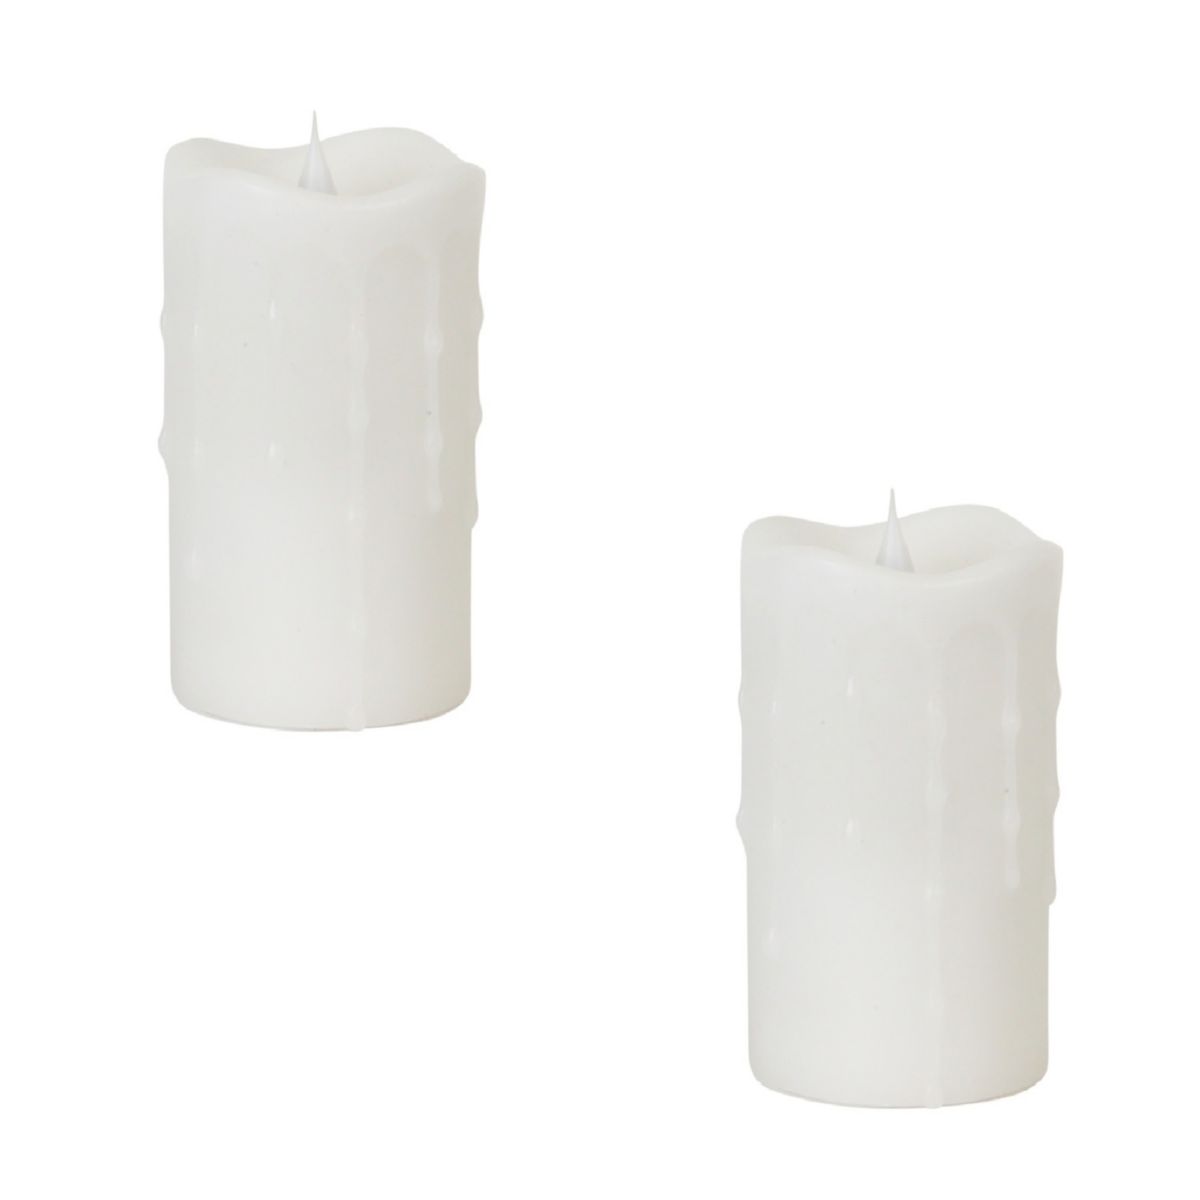 Simplux Designer LED Dripping Candle with Moving Flame and Remote (Set of 2) Slickblue